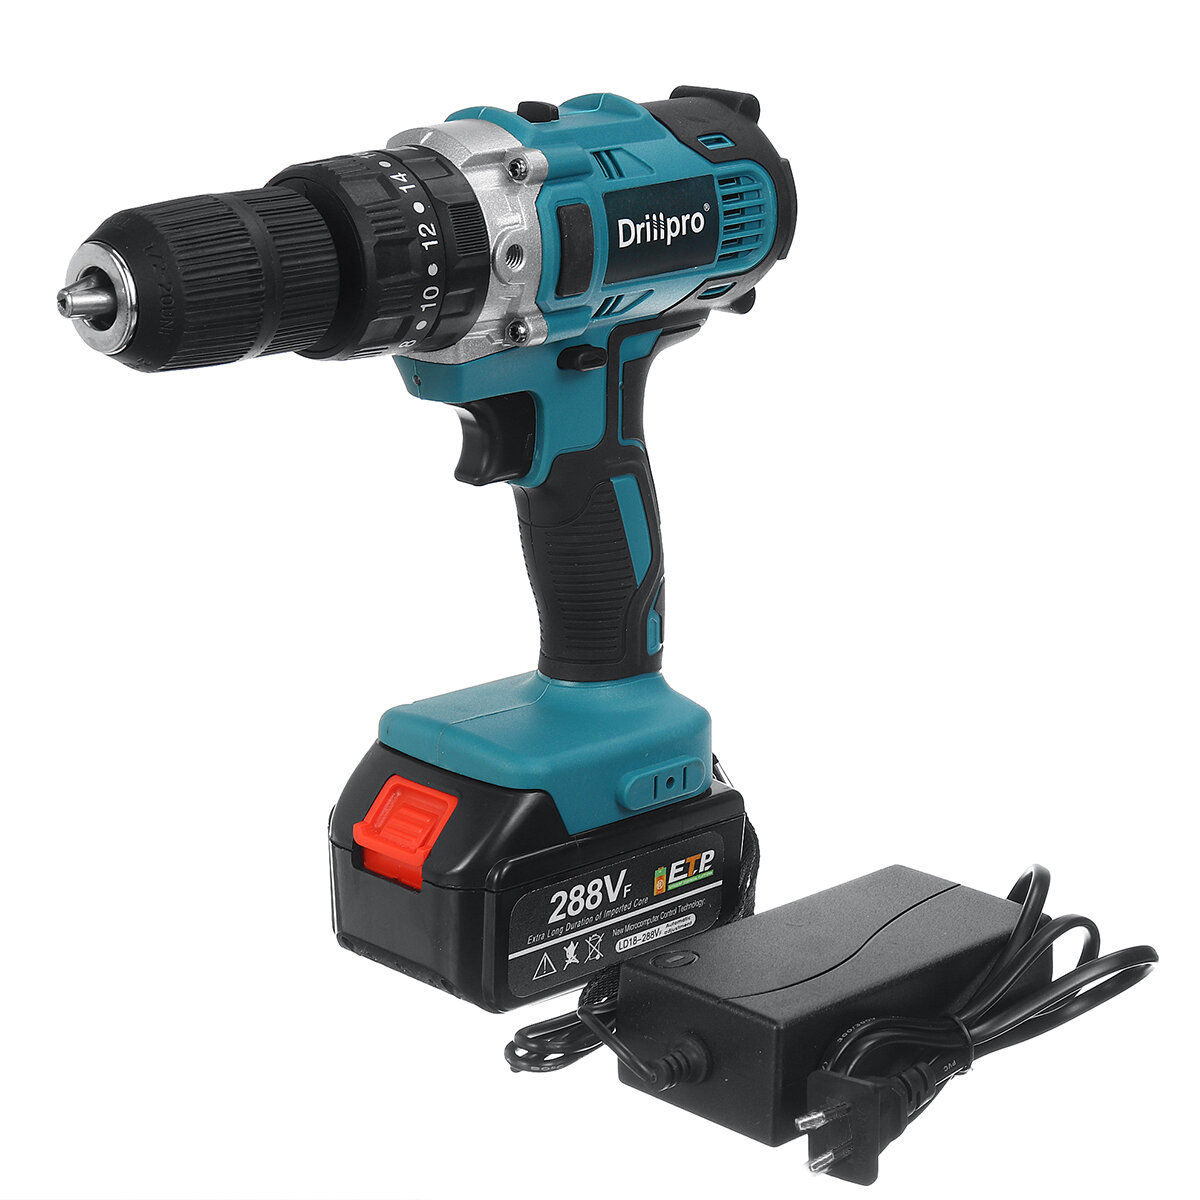 Image of Drillpro 288VF 3 in 1 Cordless Impact Drill 13mm Chuck LED Flat Drill Screwdriver Hammer W/ 1/2pcs Battery